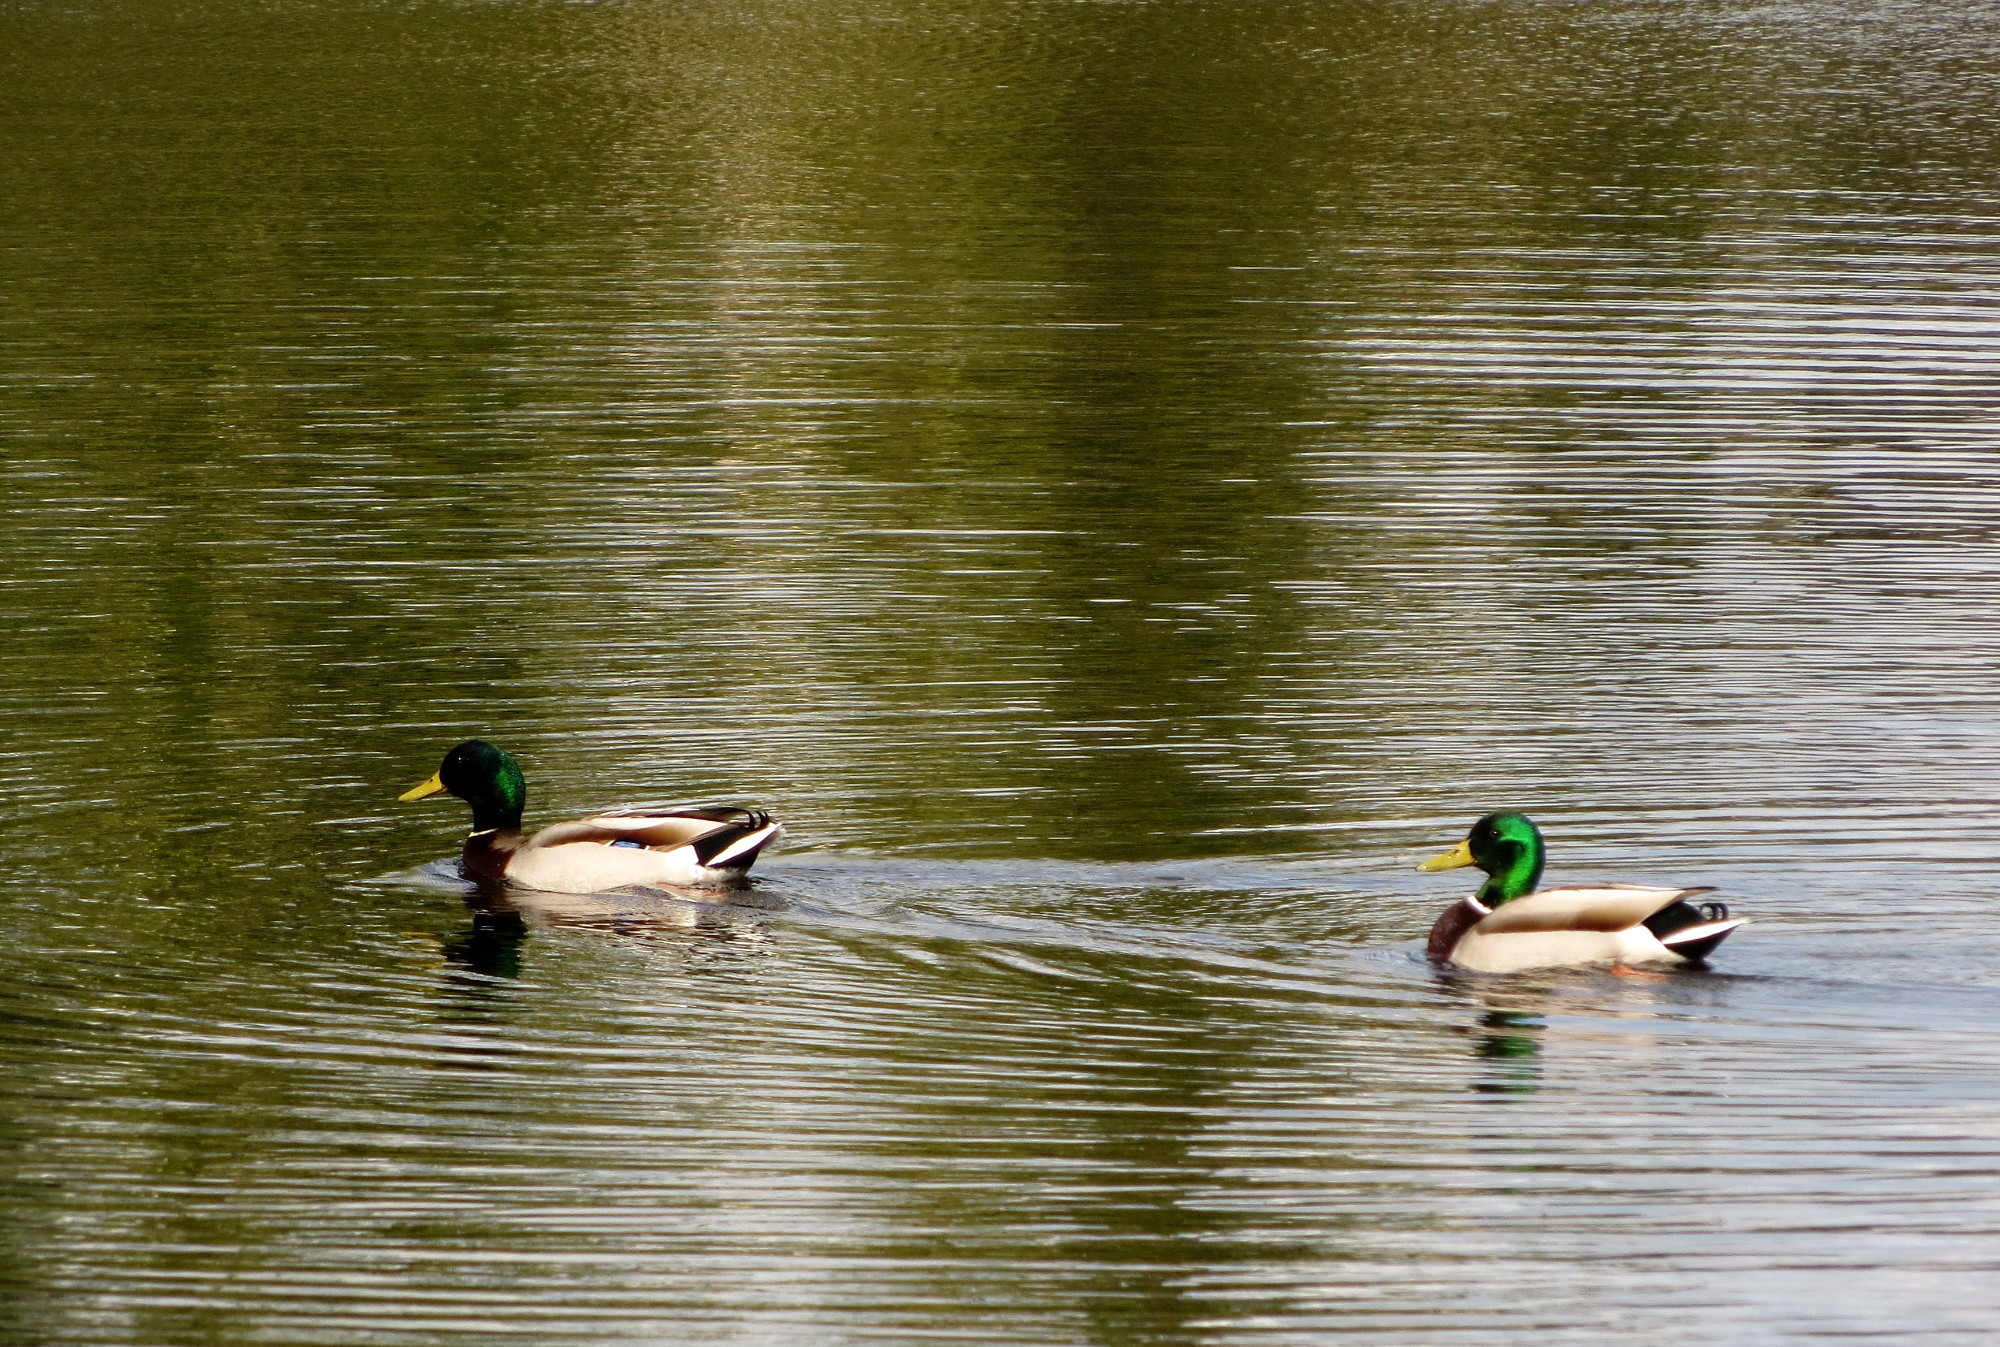 Two mallard drakes float on the seasonal pond, the surface rippled and reflecting the color of trees